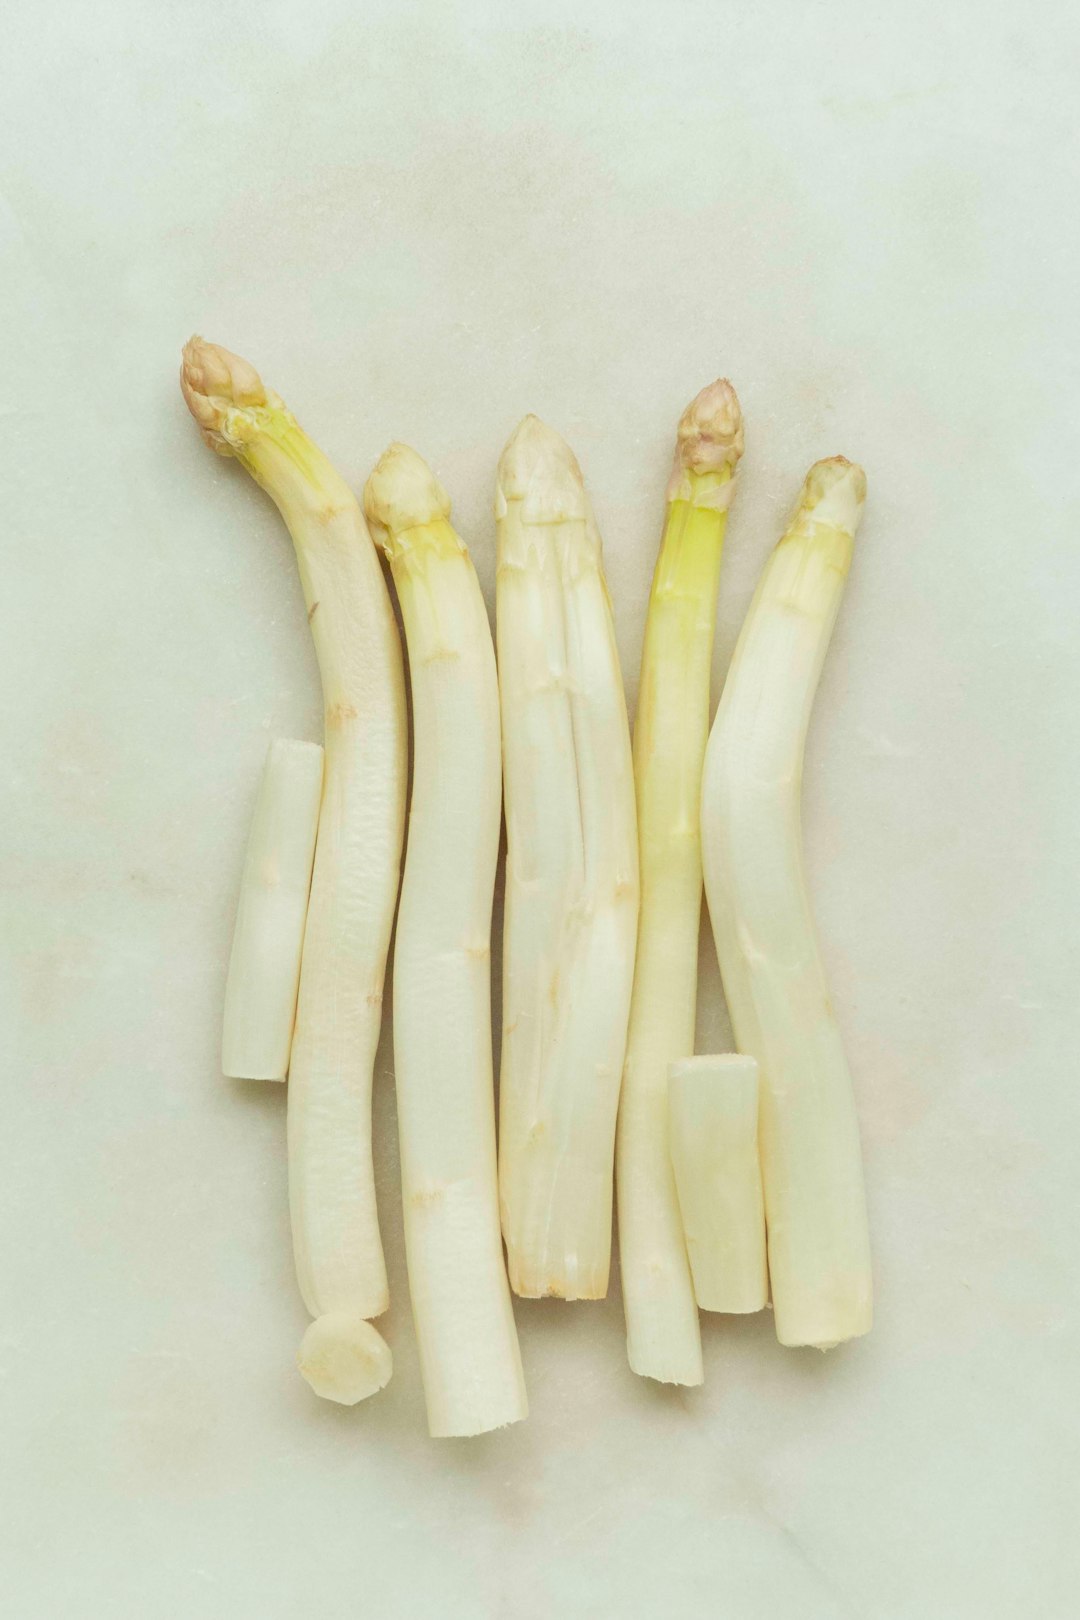 ZERO WASTE | COOK WITH CLASS II WHITE GOLD
It is this time of the year that many of us in the Lowlands get bonkers over white asparagus, better known as white gold. However, some are obsessed finding the most straight Class I/AA quality white asparagus. This results in food waste. Nature has a mind of her own, so many asparagus have beautiful curves, are sometimes "born" as twins, their tips are often slightly open + they may have some cuts + bruises. Just like us humans. Does that mean they have to be rejected, neglected or even discarded? No, they are still delicately delicious. 
